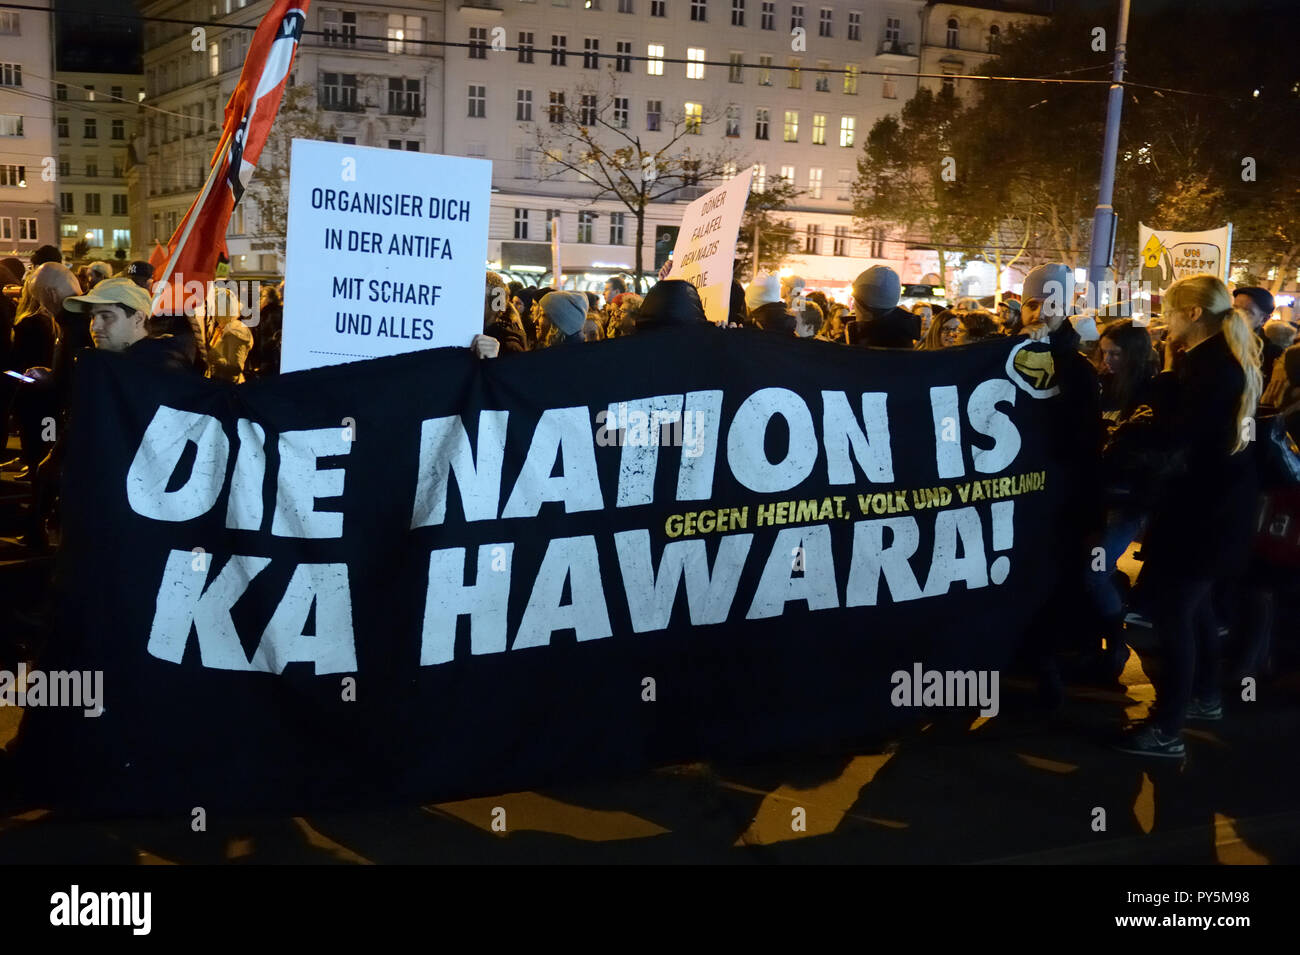 Vienna, Austria. October 25, 2018. The Thursday demonstrations against the current Federal Government are reactivated. The rally was called on Schwedenplatz. The protests will then be continued every week at various locations in Vienna. Picture shows a poster with the inscription 'Organize yourself in the ANTIFA, with sharp and everything'. Credit: Franz Perc / Alamy Live News Stock Photo